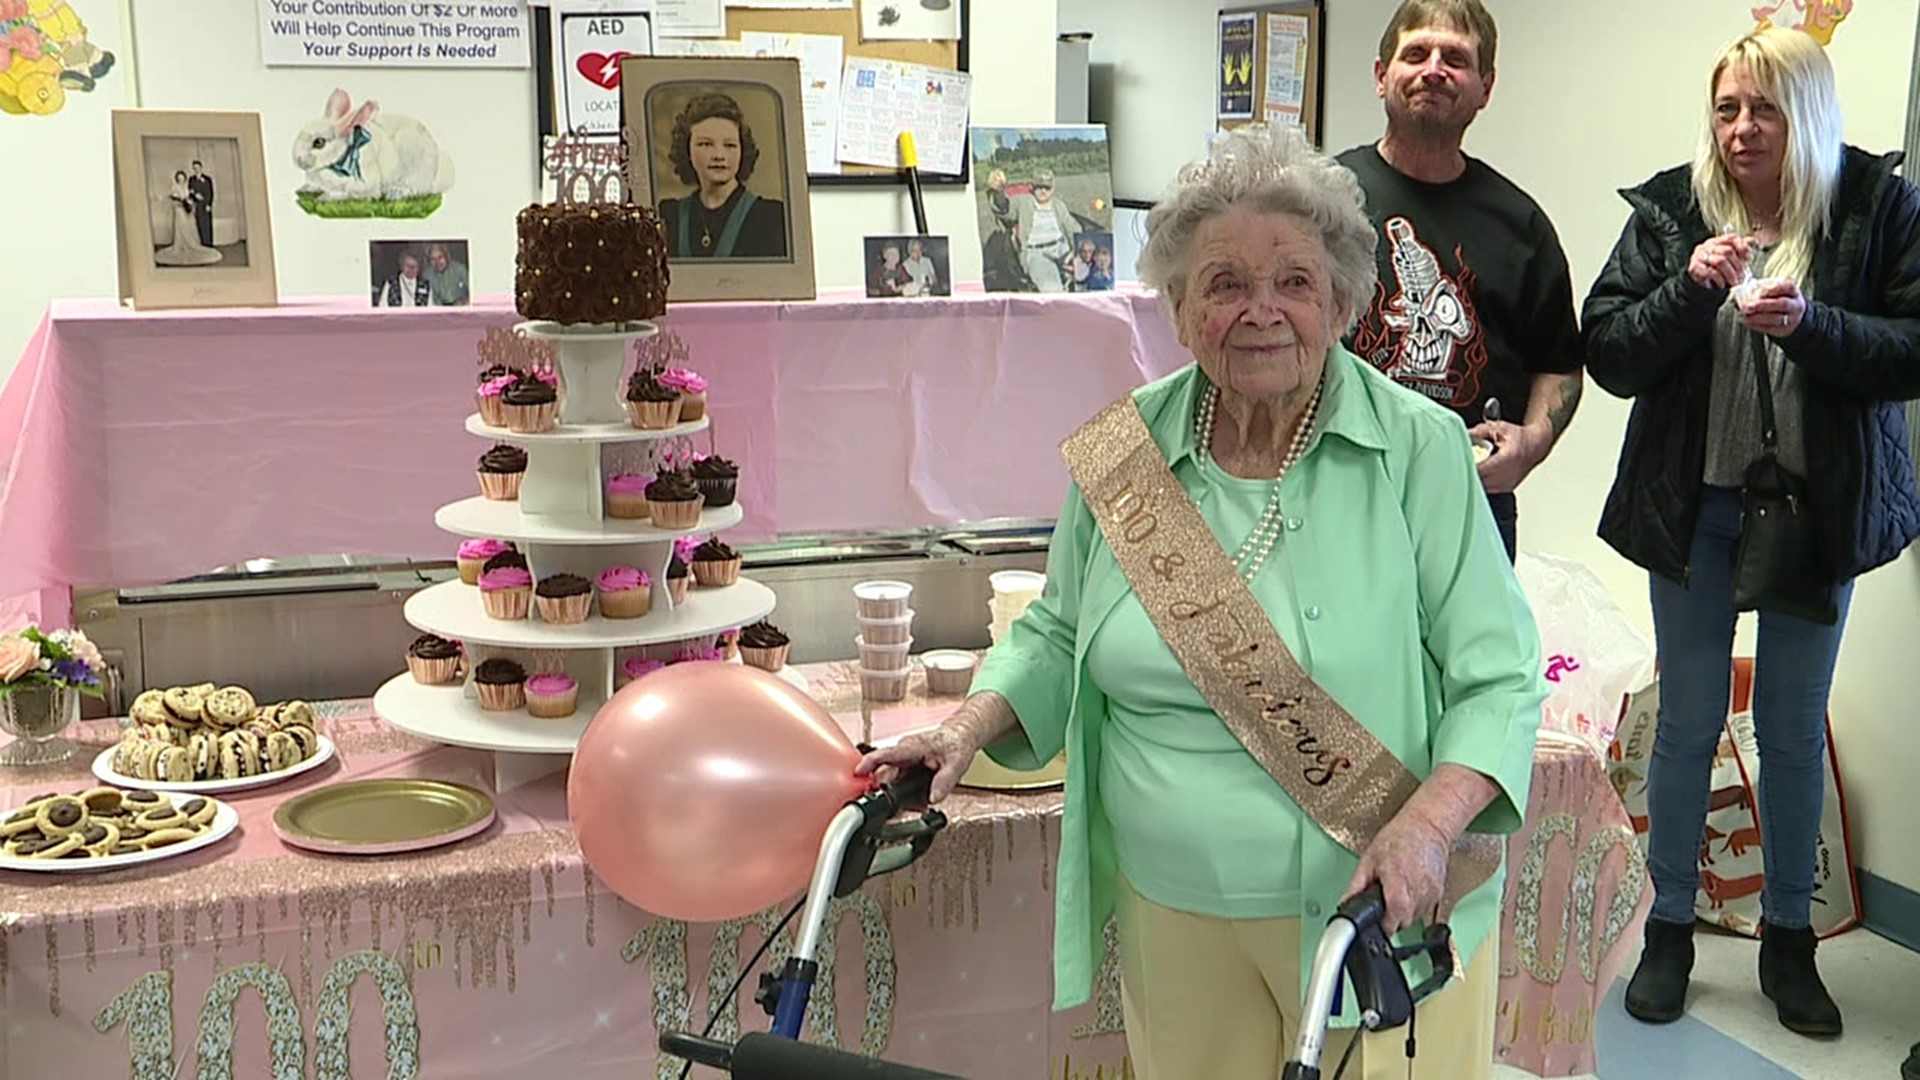 A woman in Luzerne County celebrated her 100th birthday on Saturday.